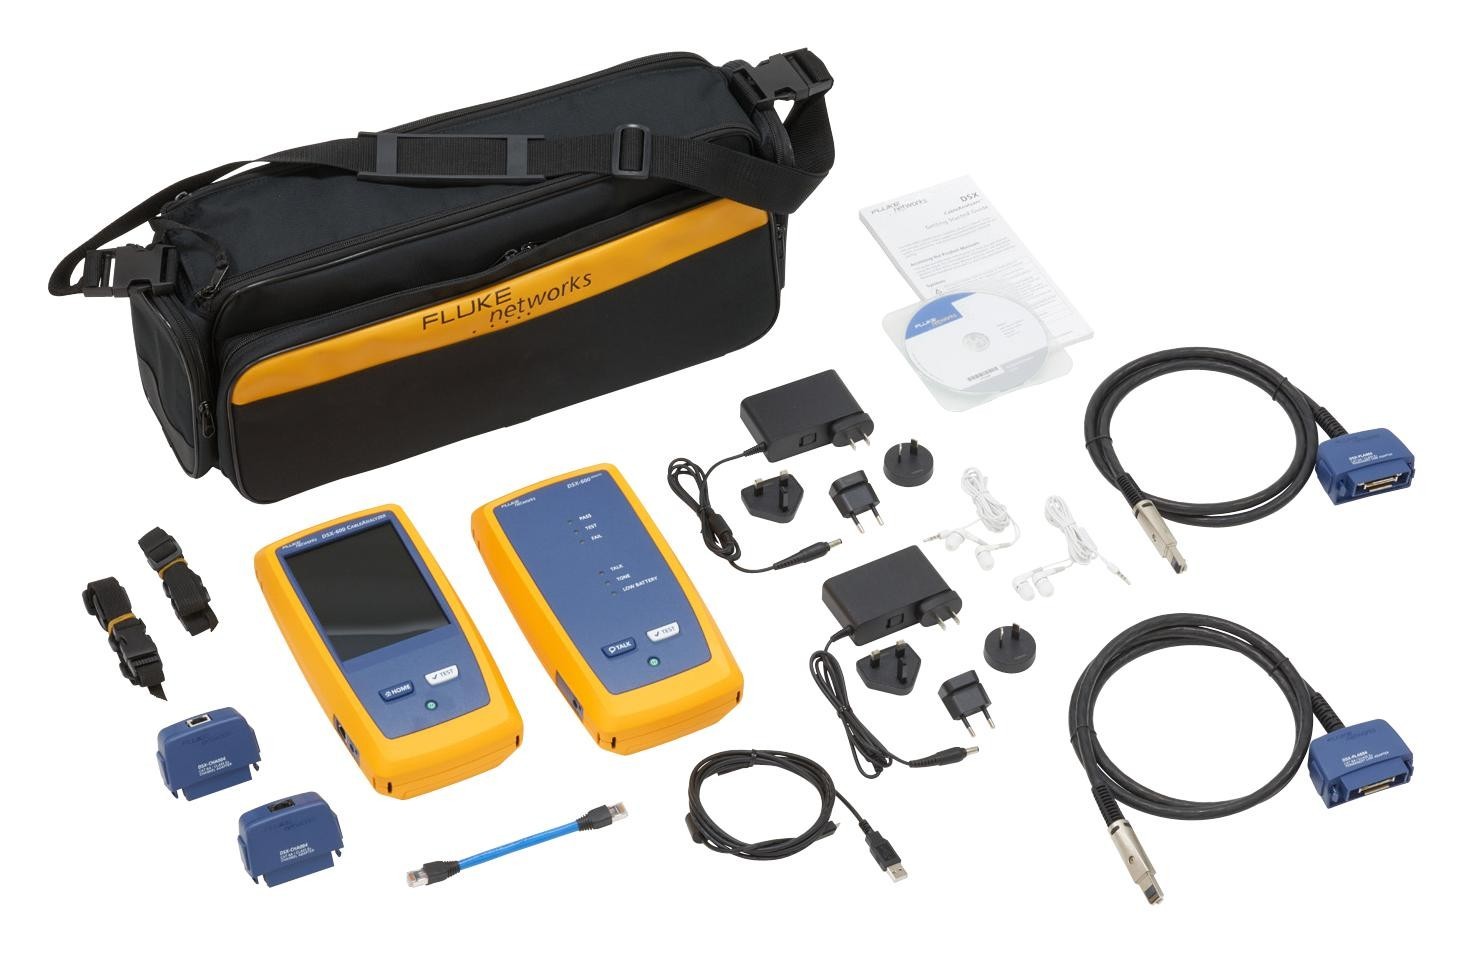 Fluke Networks Dsx-602-Pro Int Network Cable Analyser, Wifi, Lcd